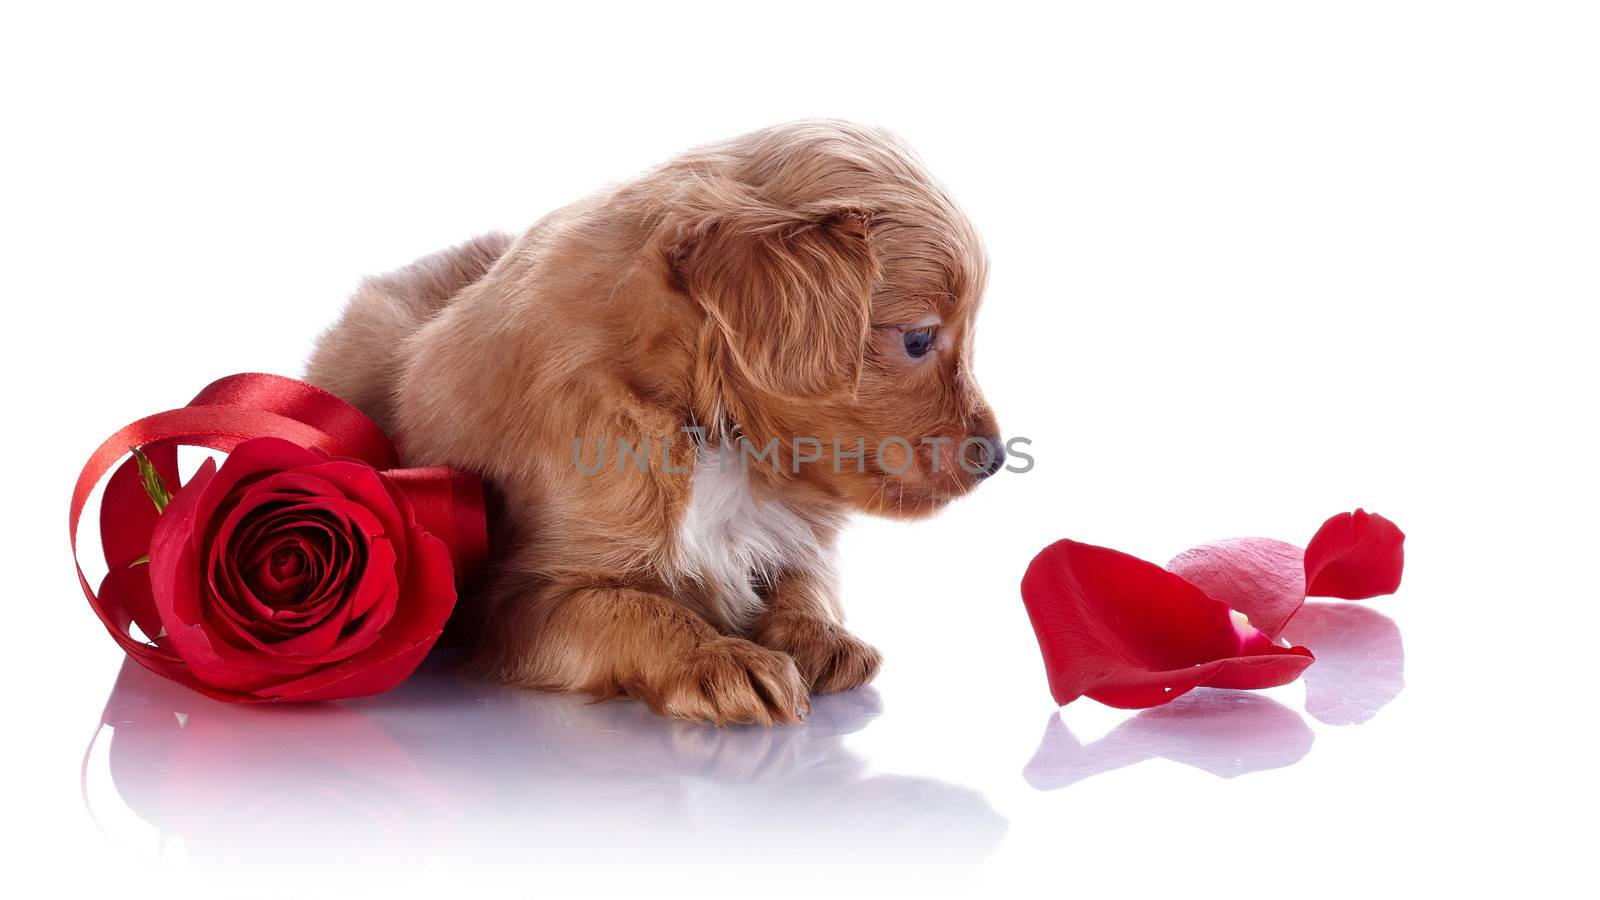 Puppy with a red rose and petals. by Azaliya